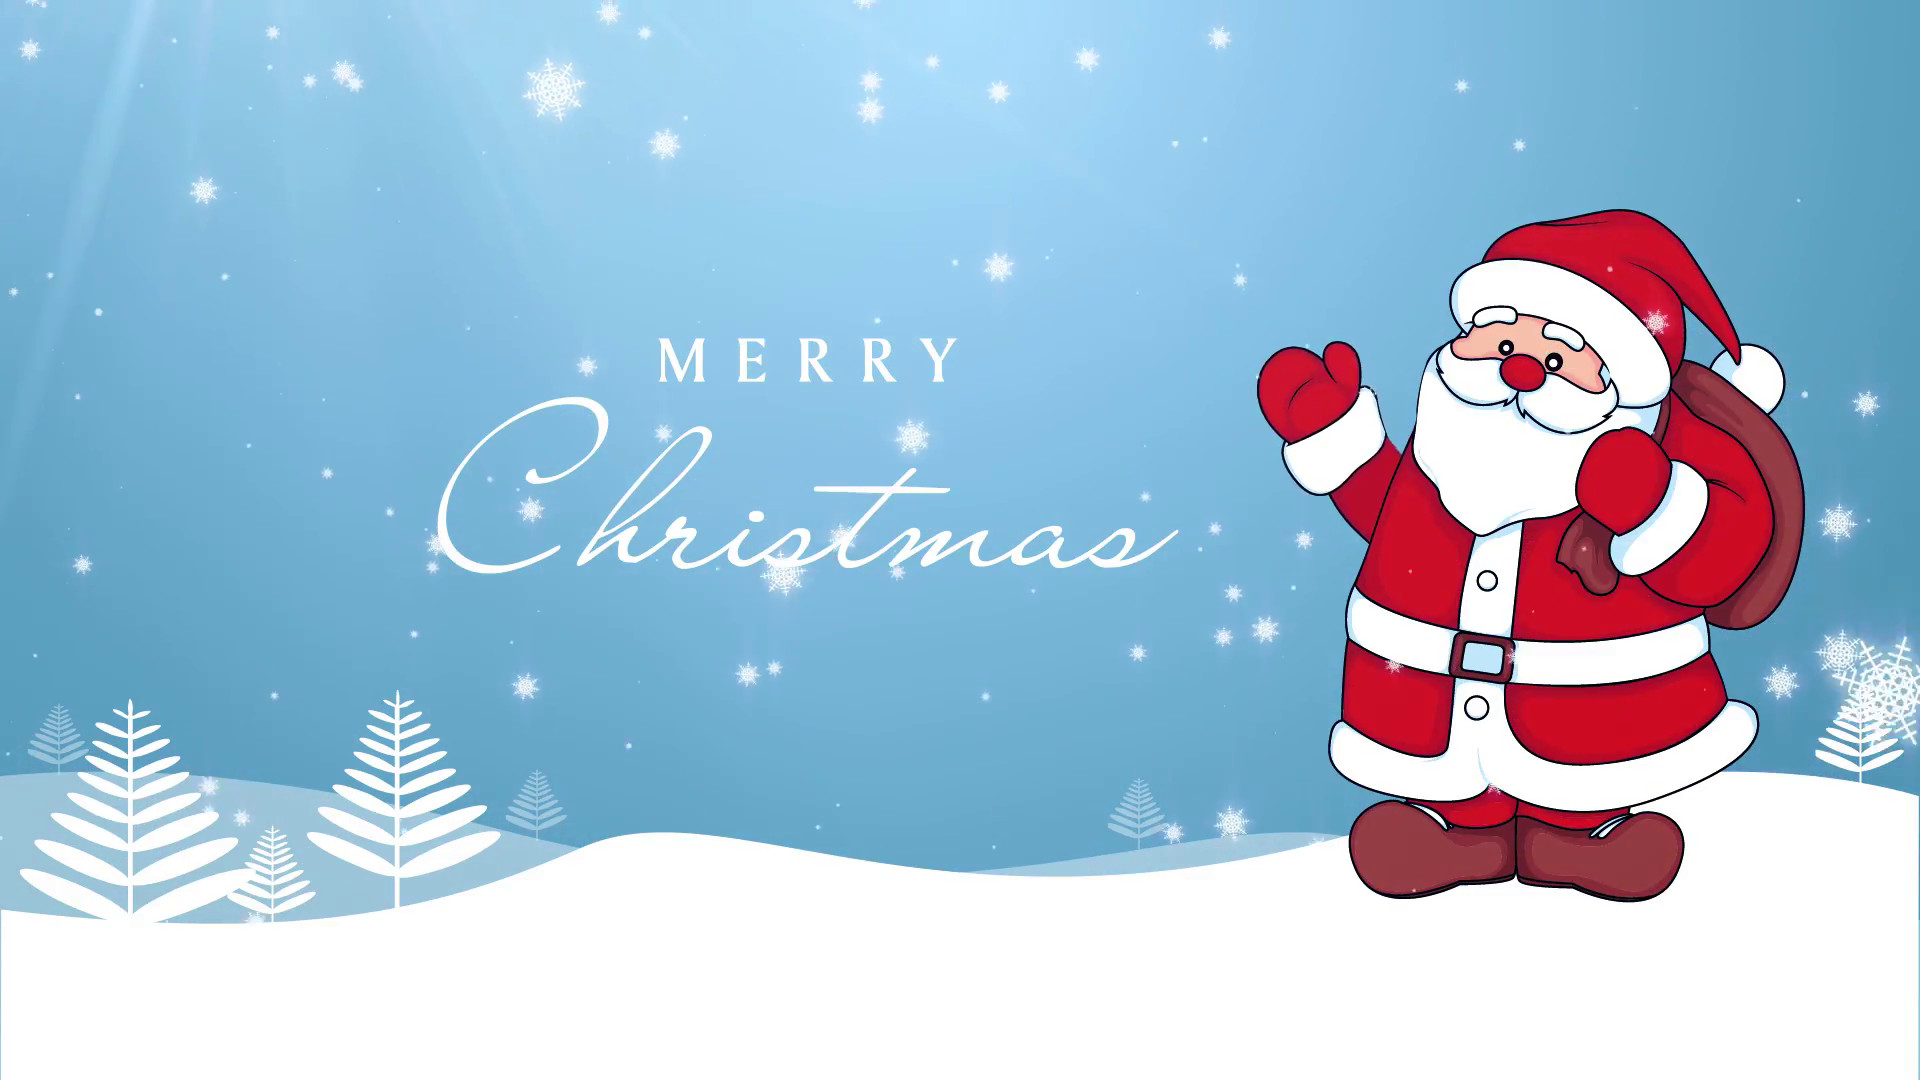 Merry Christmas Background Pictures (41+ pictures)